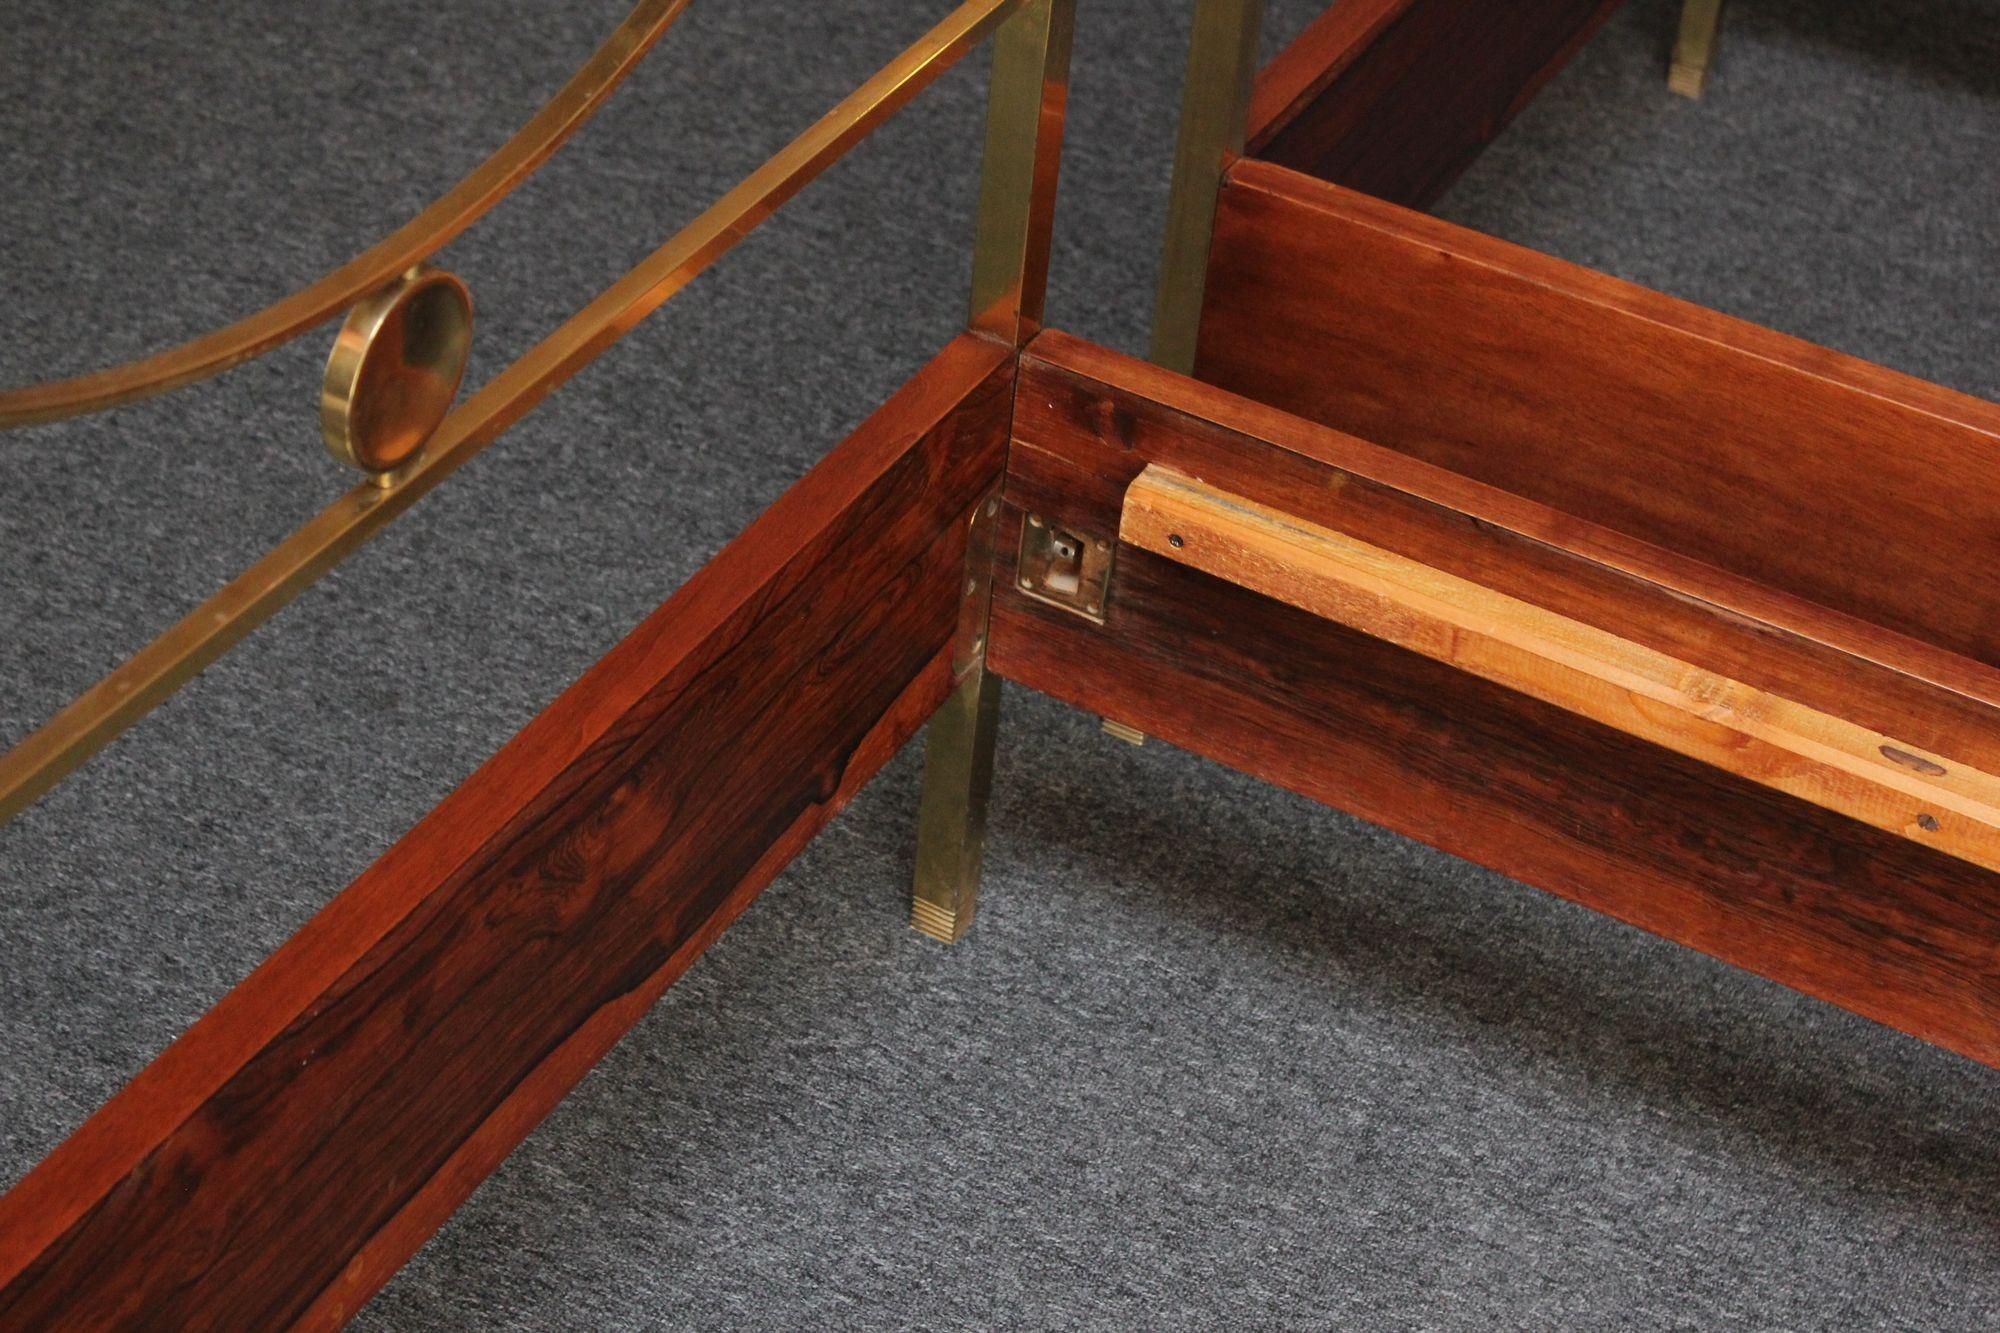 Pair of Vintage Italian Mahogany and Brass Beds by Carlo de Carli for Sormani For Sale 2